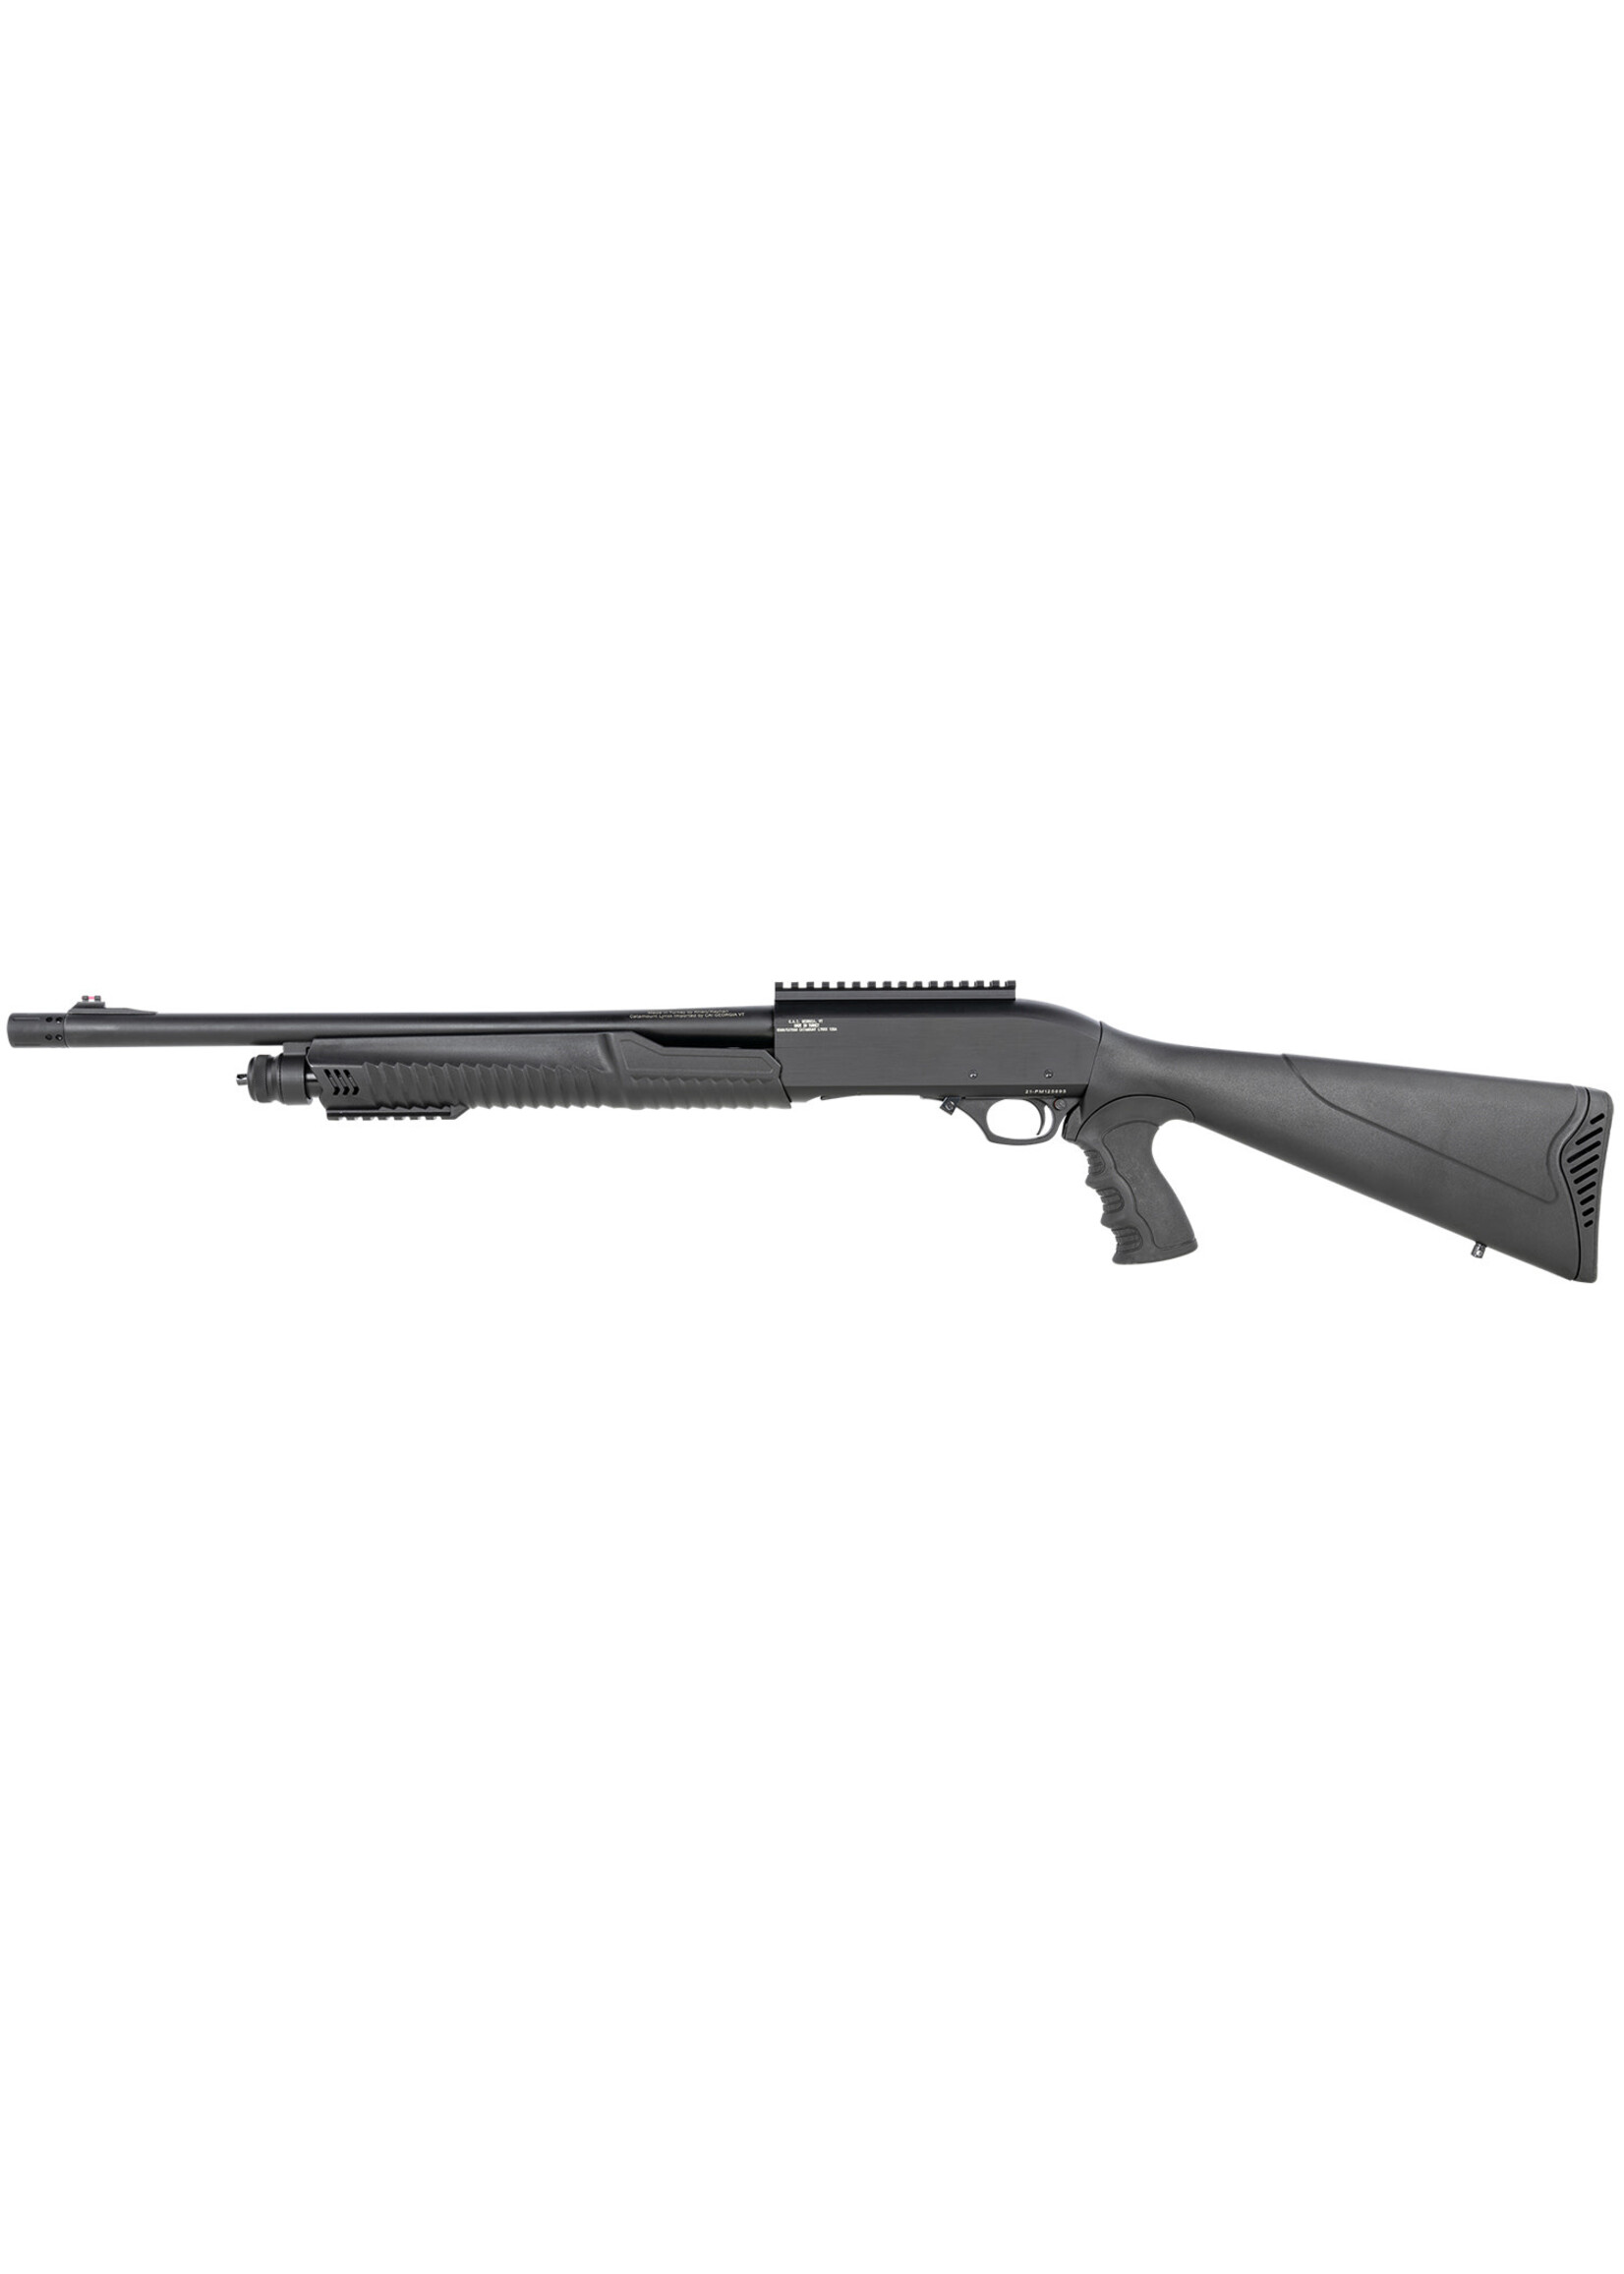 Century Arms Century Arms SG2118N Catamount Lynxx 12 Gauge 5+1 (2.75") 3" Chrome Lined Cylinder Bore Barrel, Ported Muzzle, Fiber Optic Front Sight, Synthetic Pistol Grip Stock, Picatinny Optic & Accessory Rails, Includes 3 Chokes (F,M,C)